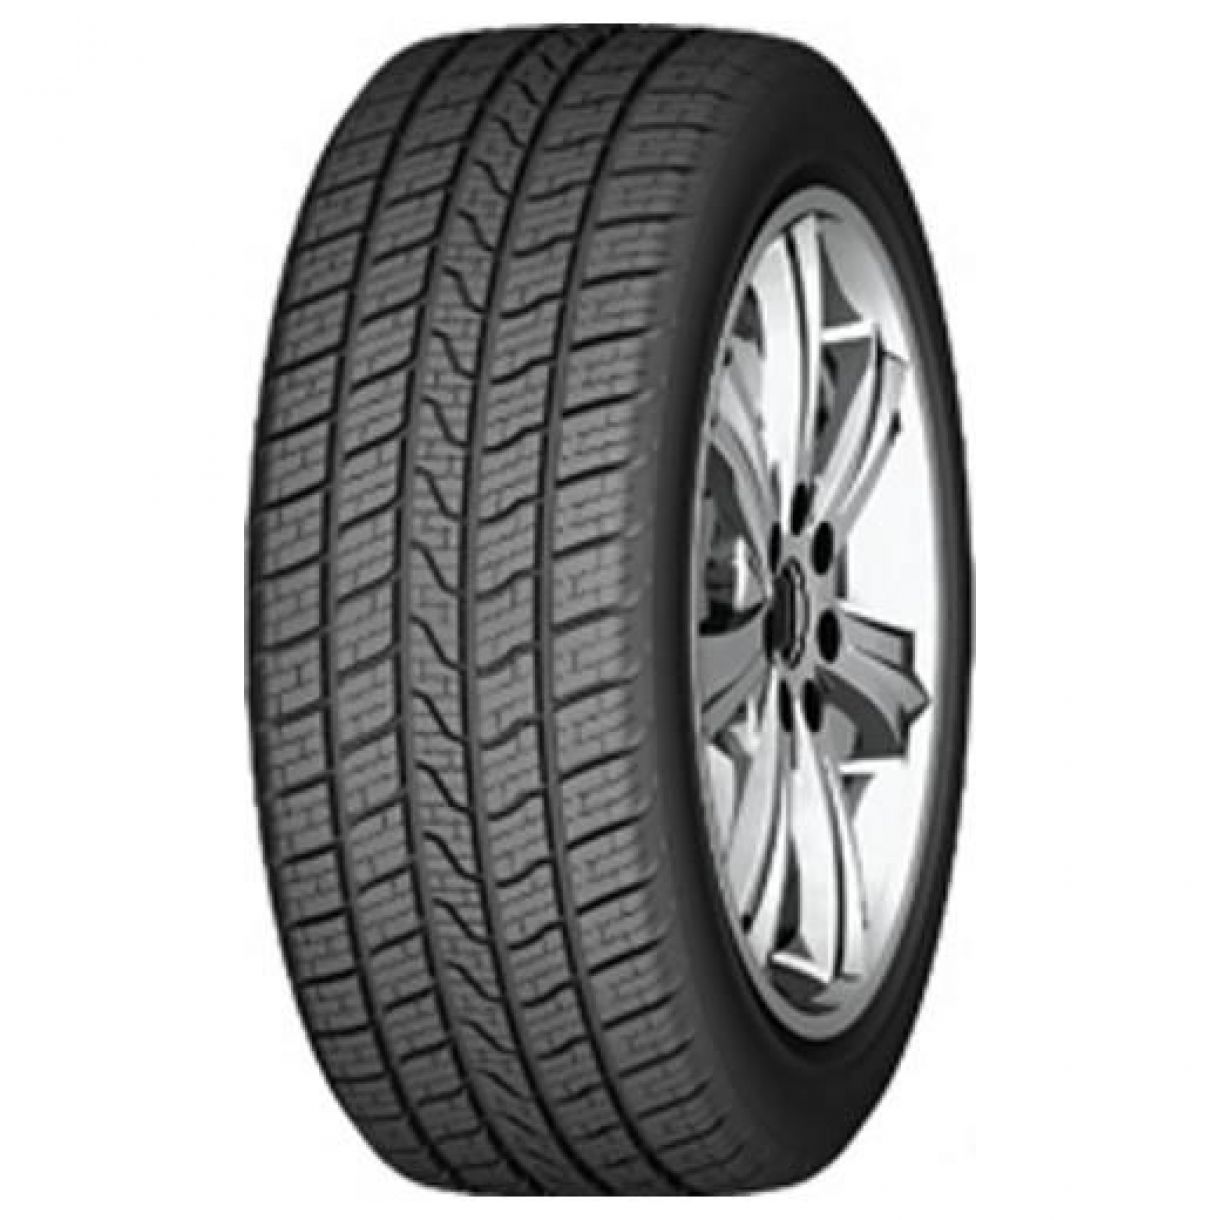 Gomme Nuove Powertrac 155/65 R13 73T POWERMARCH A-S M+S pneumatici nuovi All Season